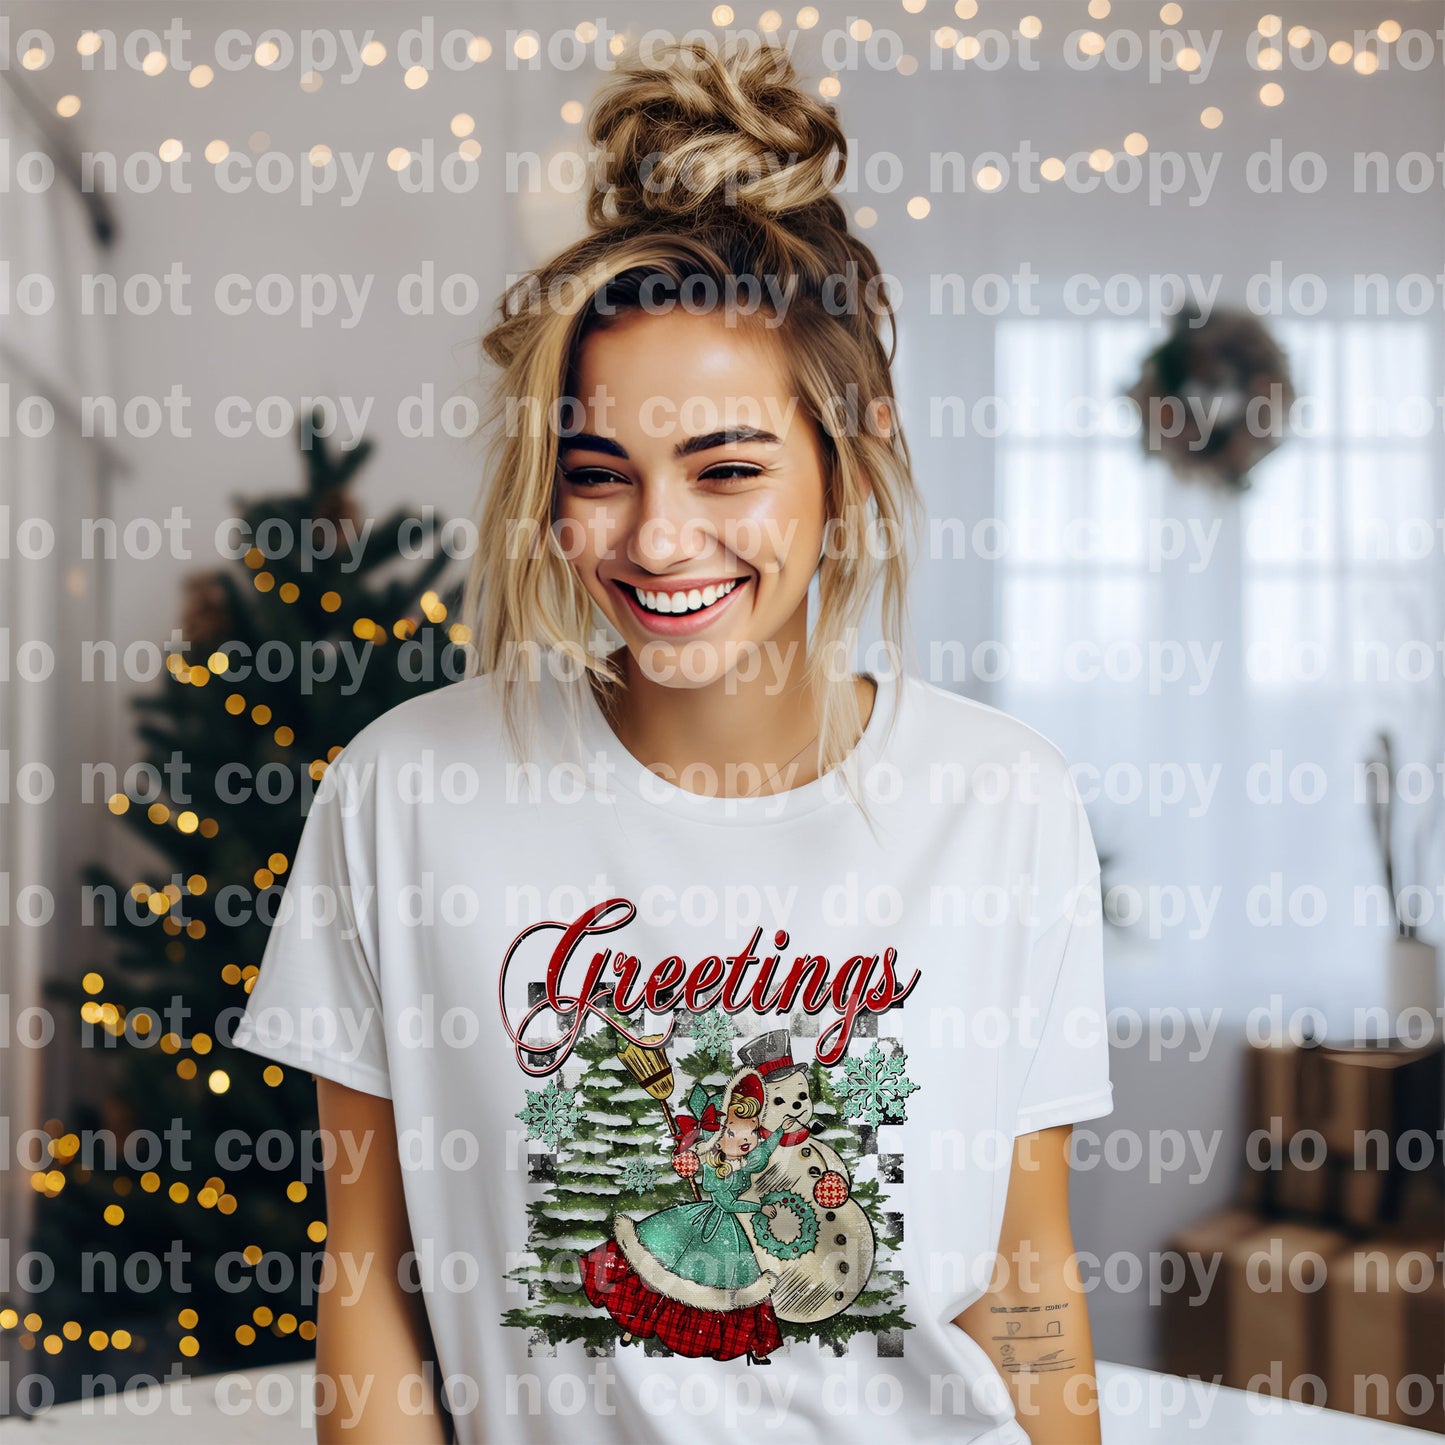 Greetings Vintage Frosty Grunge Snowman with Optional Sleeve Design Dream Print or Sublimation Print